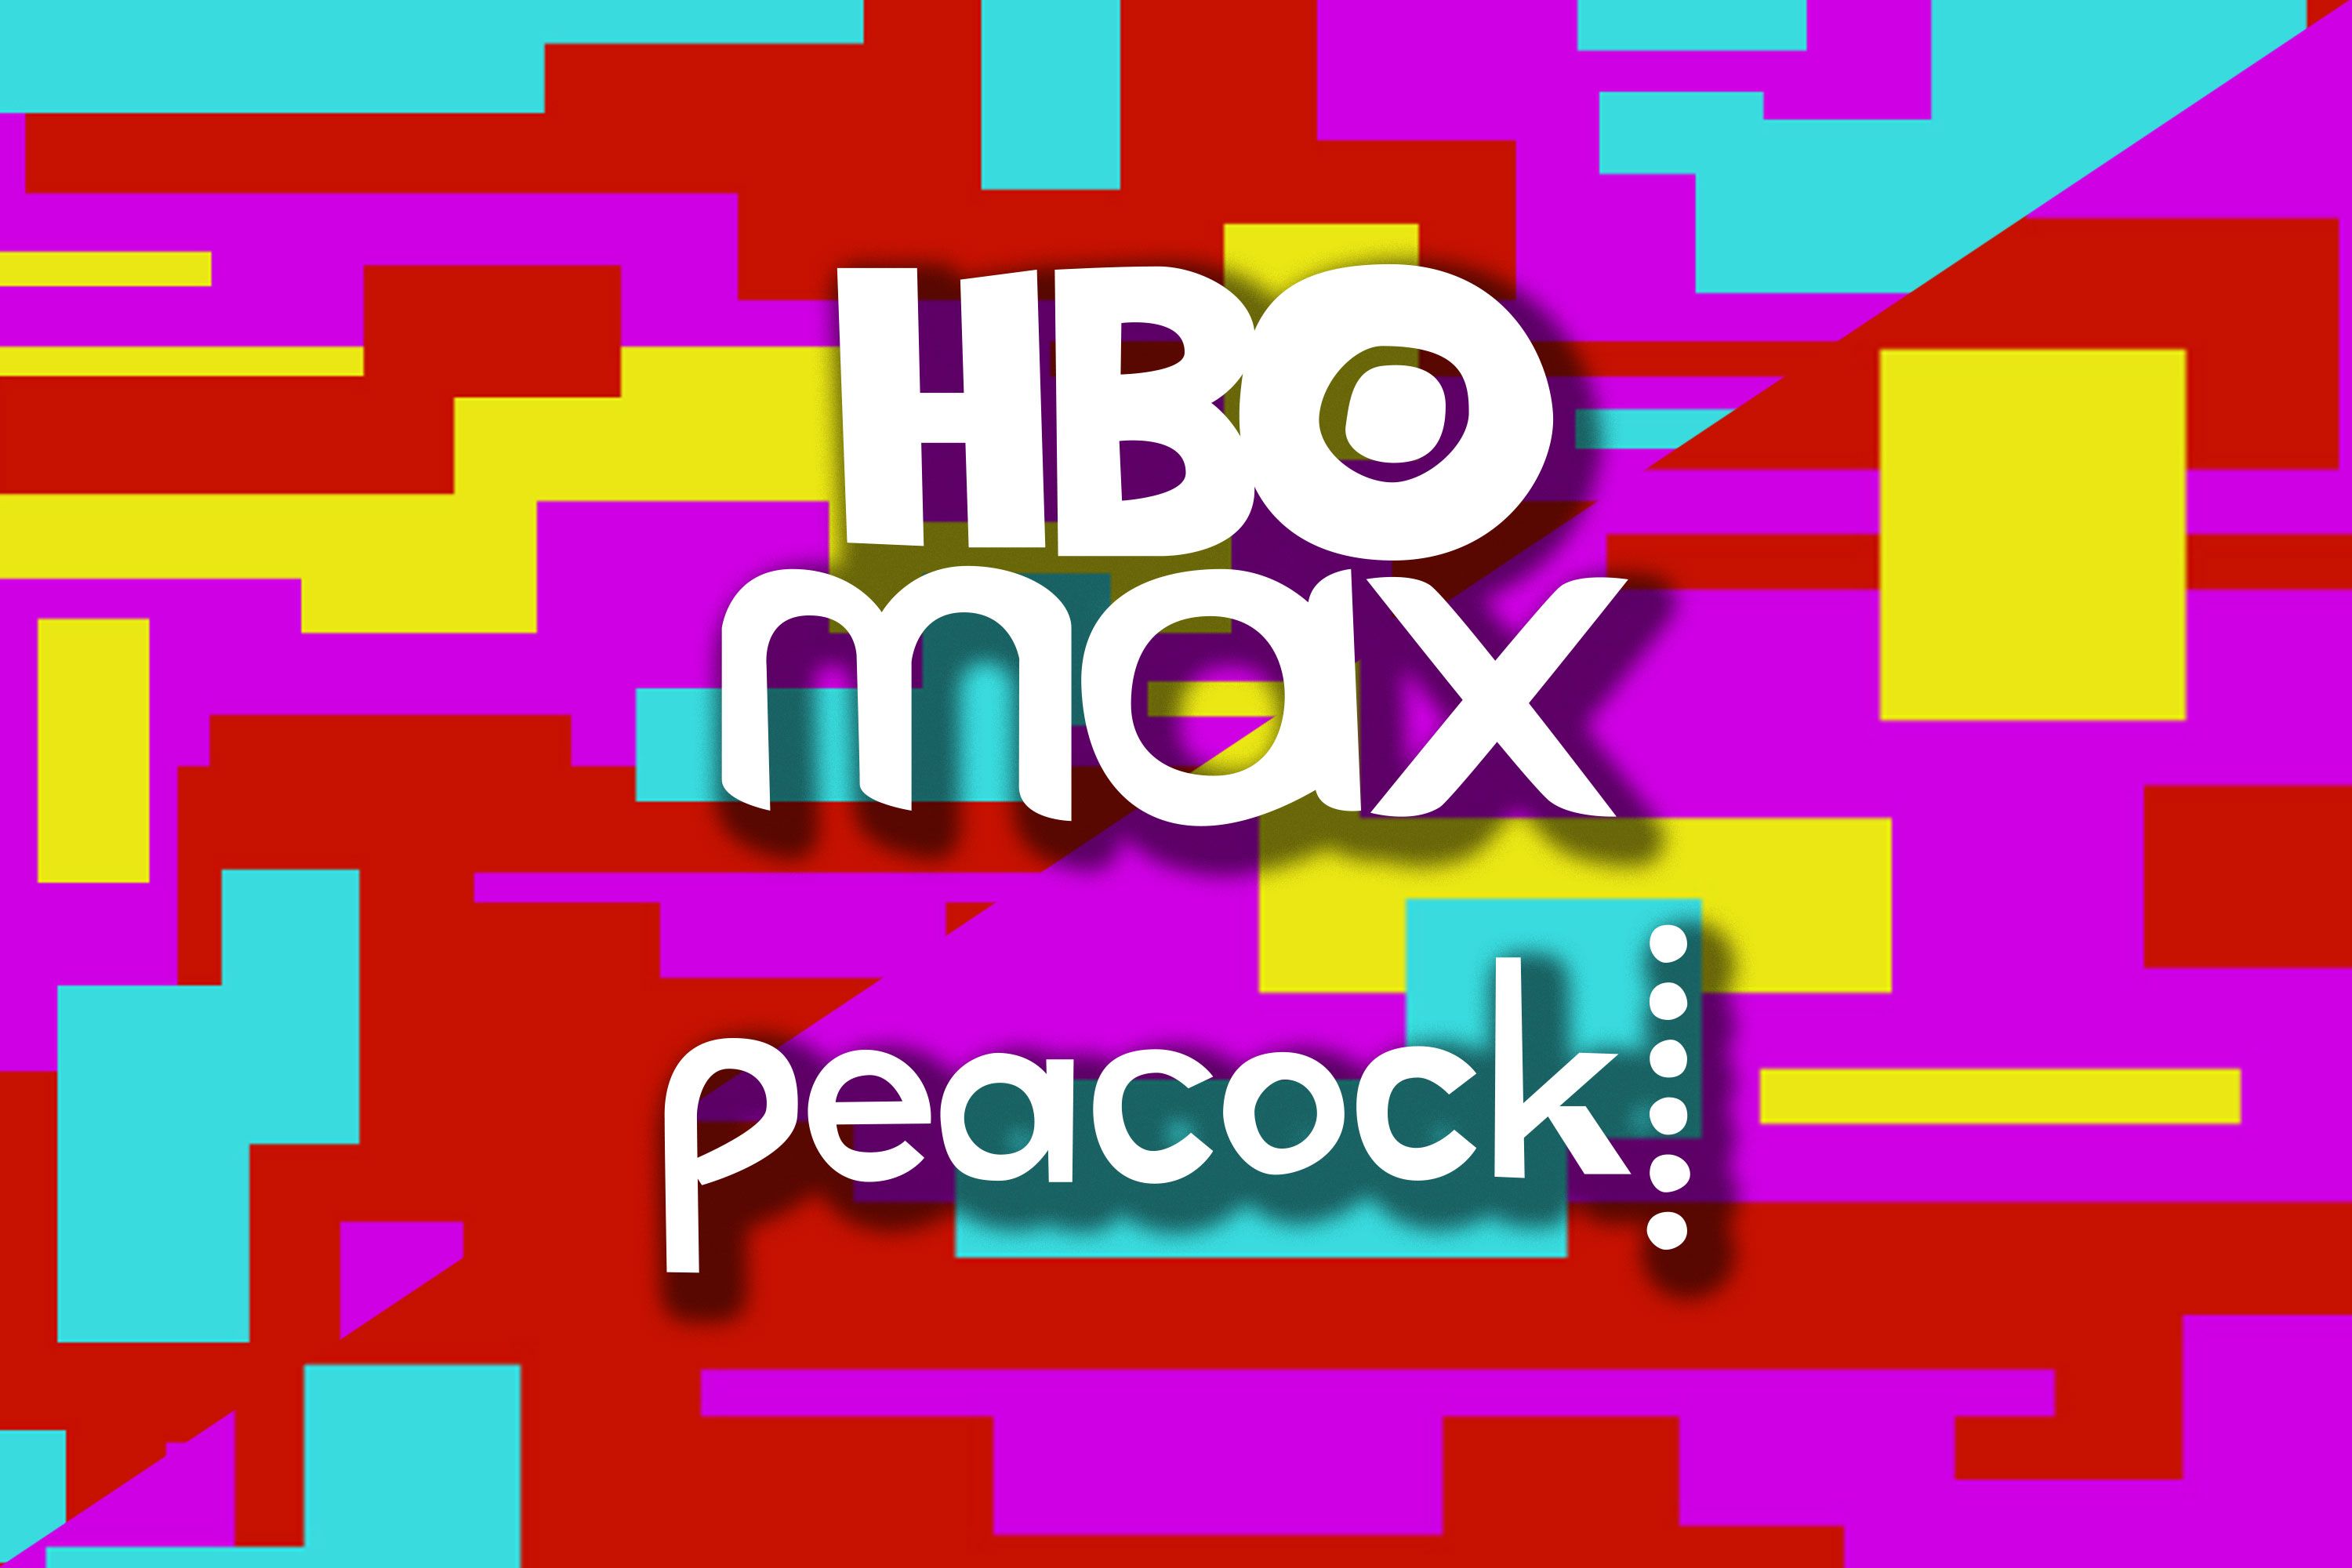 Peacock Rises, HBO Max Falls - The State of Streaming Apps in 2022 · ASO  Tools and App Analytics by Appfigures